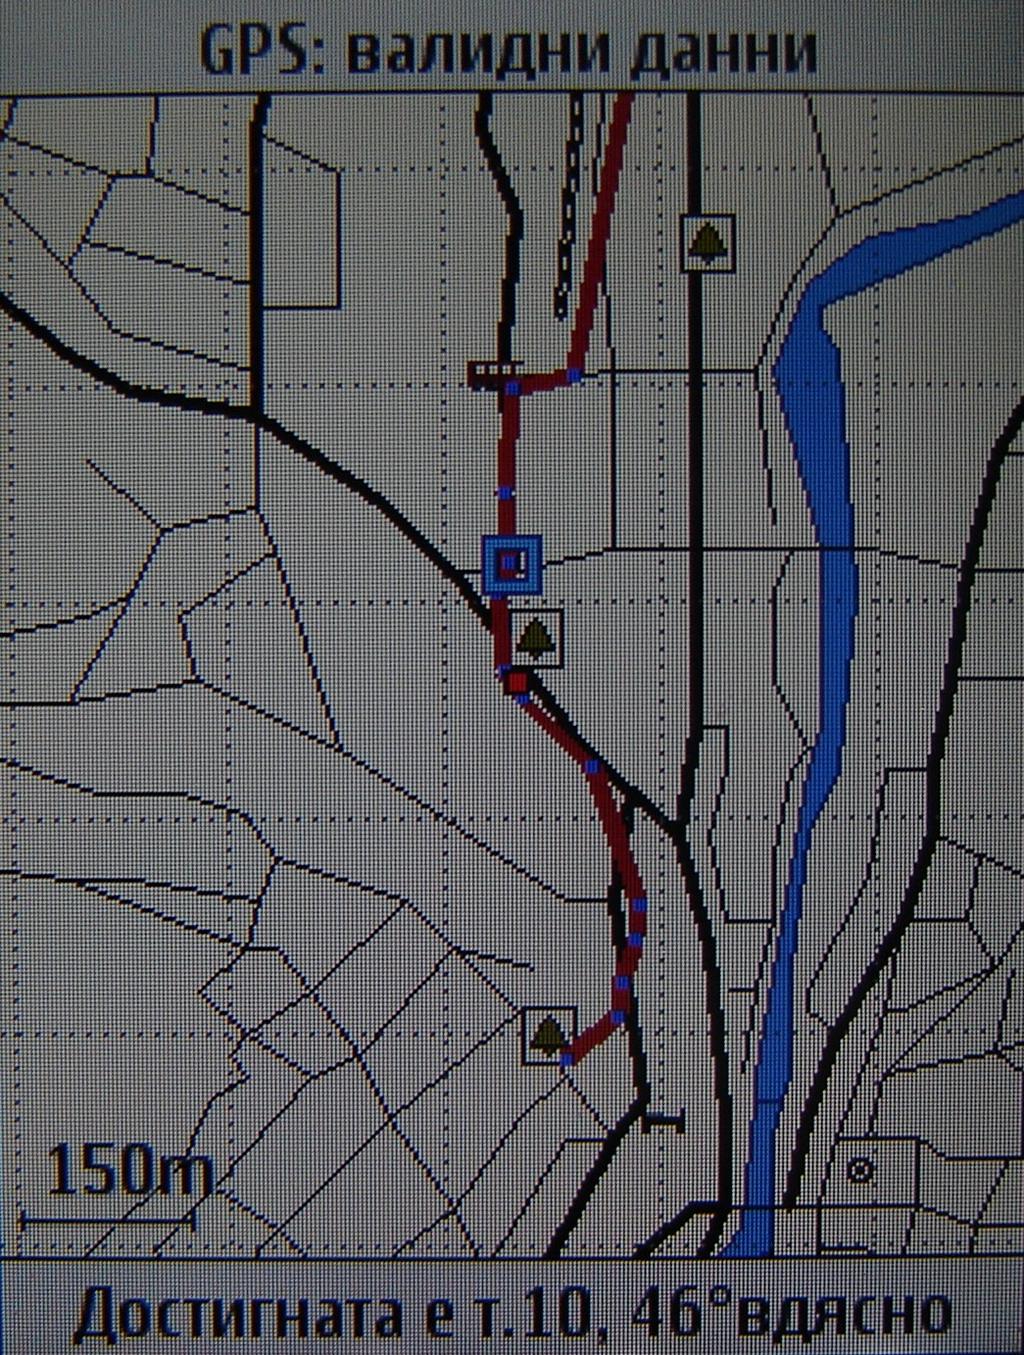 The user is informed if next waypoint if passеd (lines 45-46), otherwise voice navigation is realized (lines 49-55).